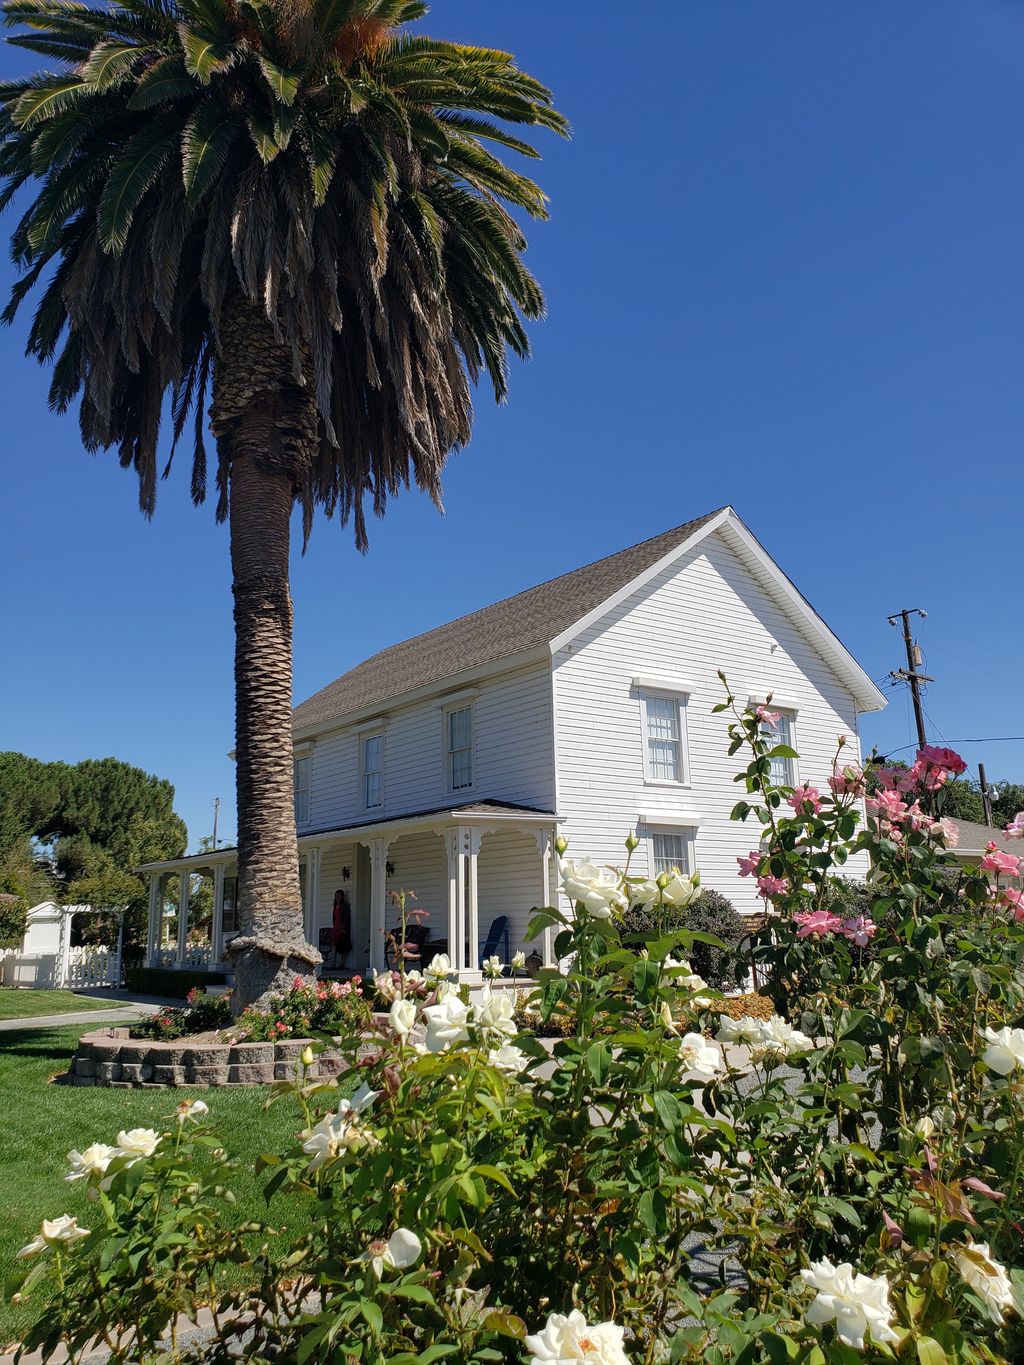 East Contra Costa Historical Society